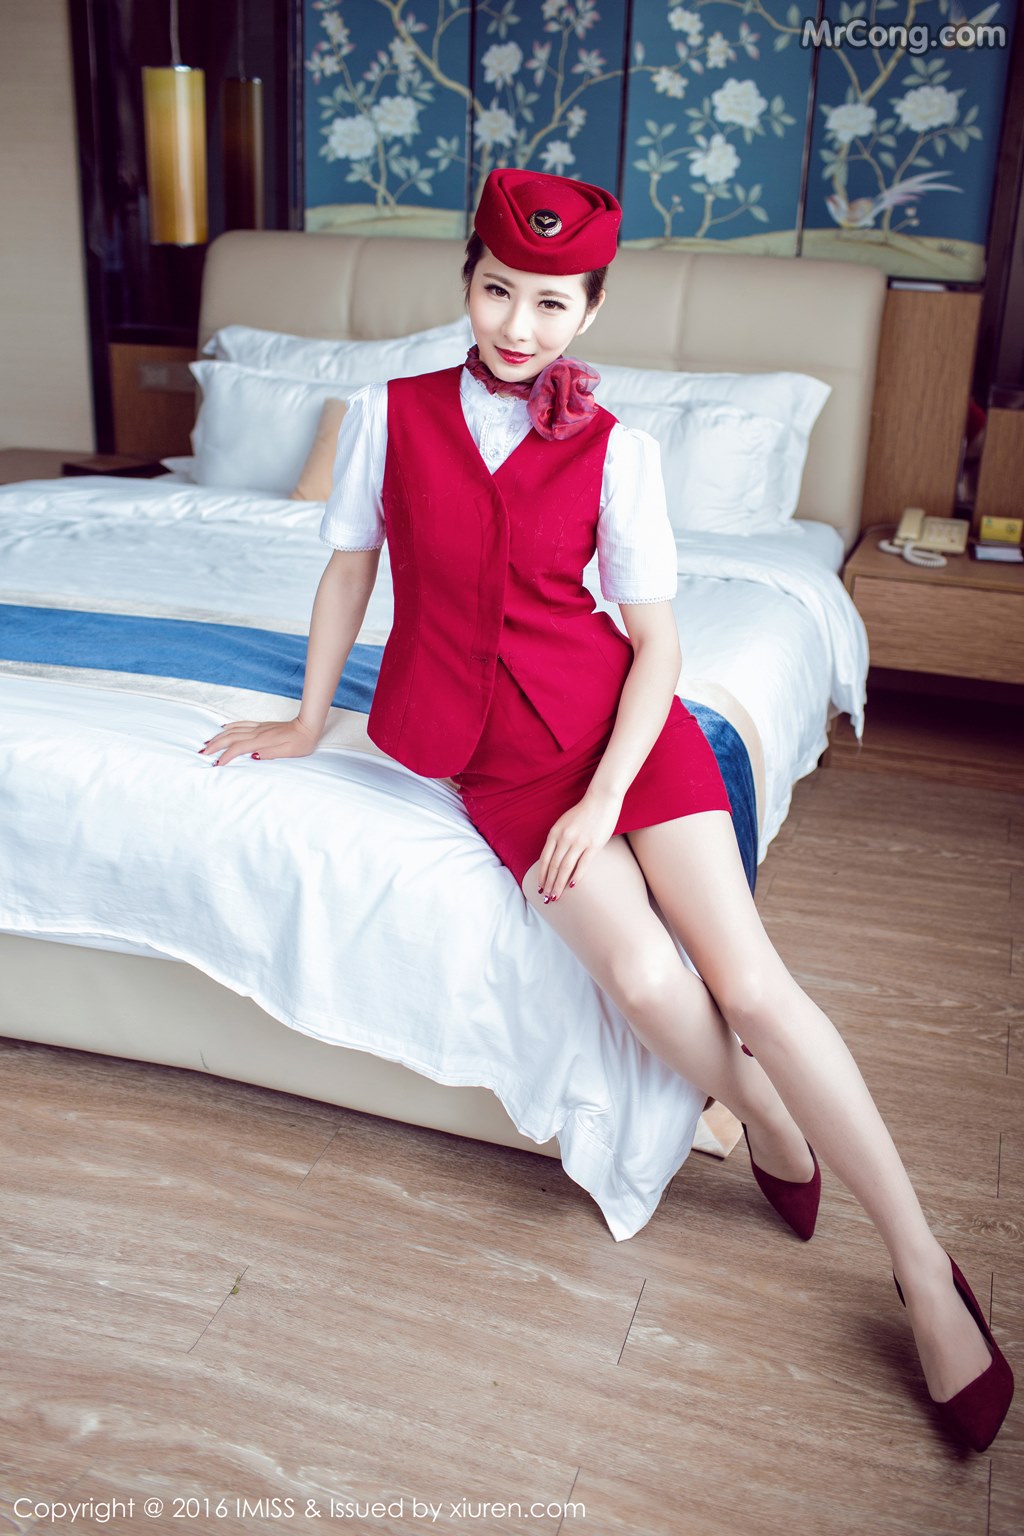 IMISS Vol.082: Lily Model (莉莉) (51 pictures) photo 1-9